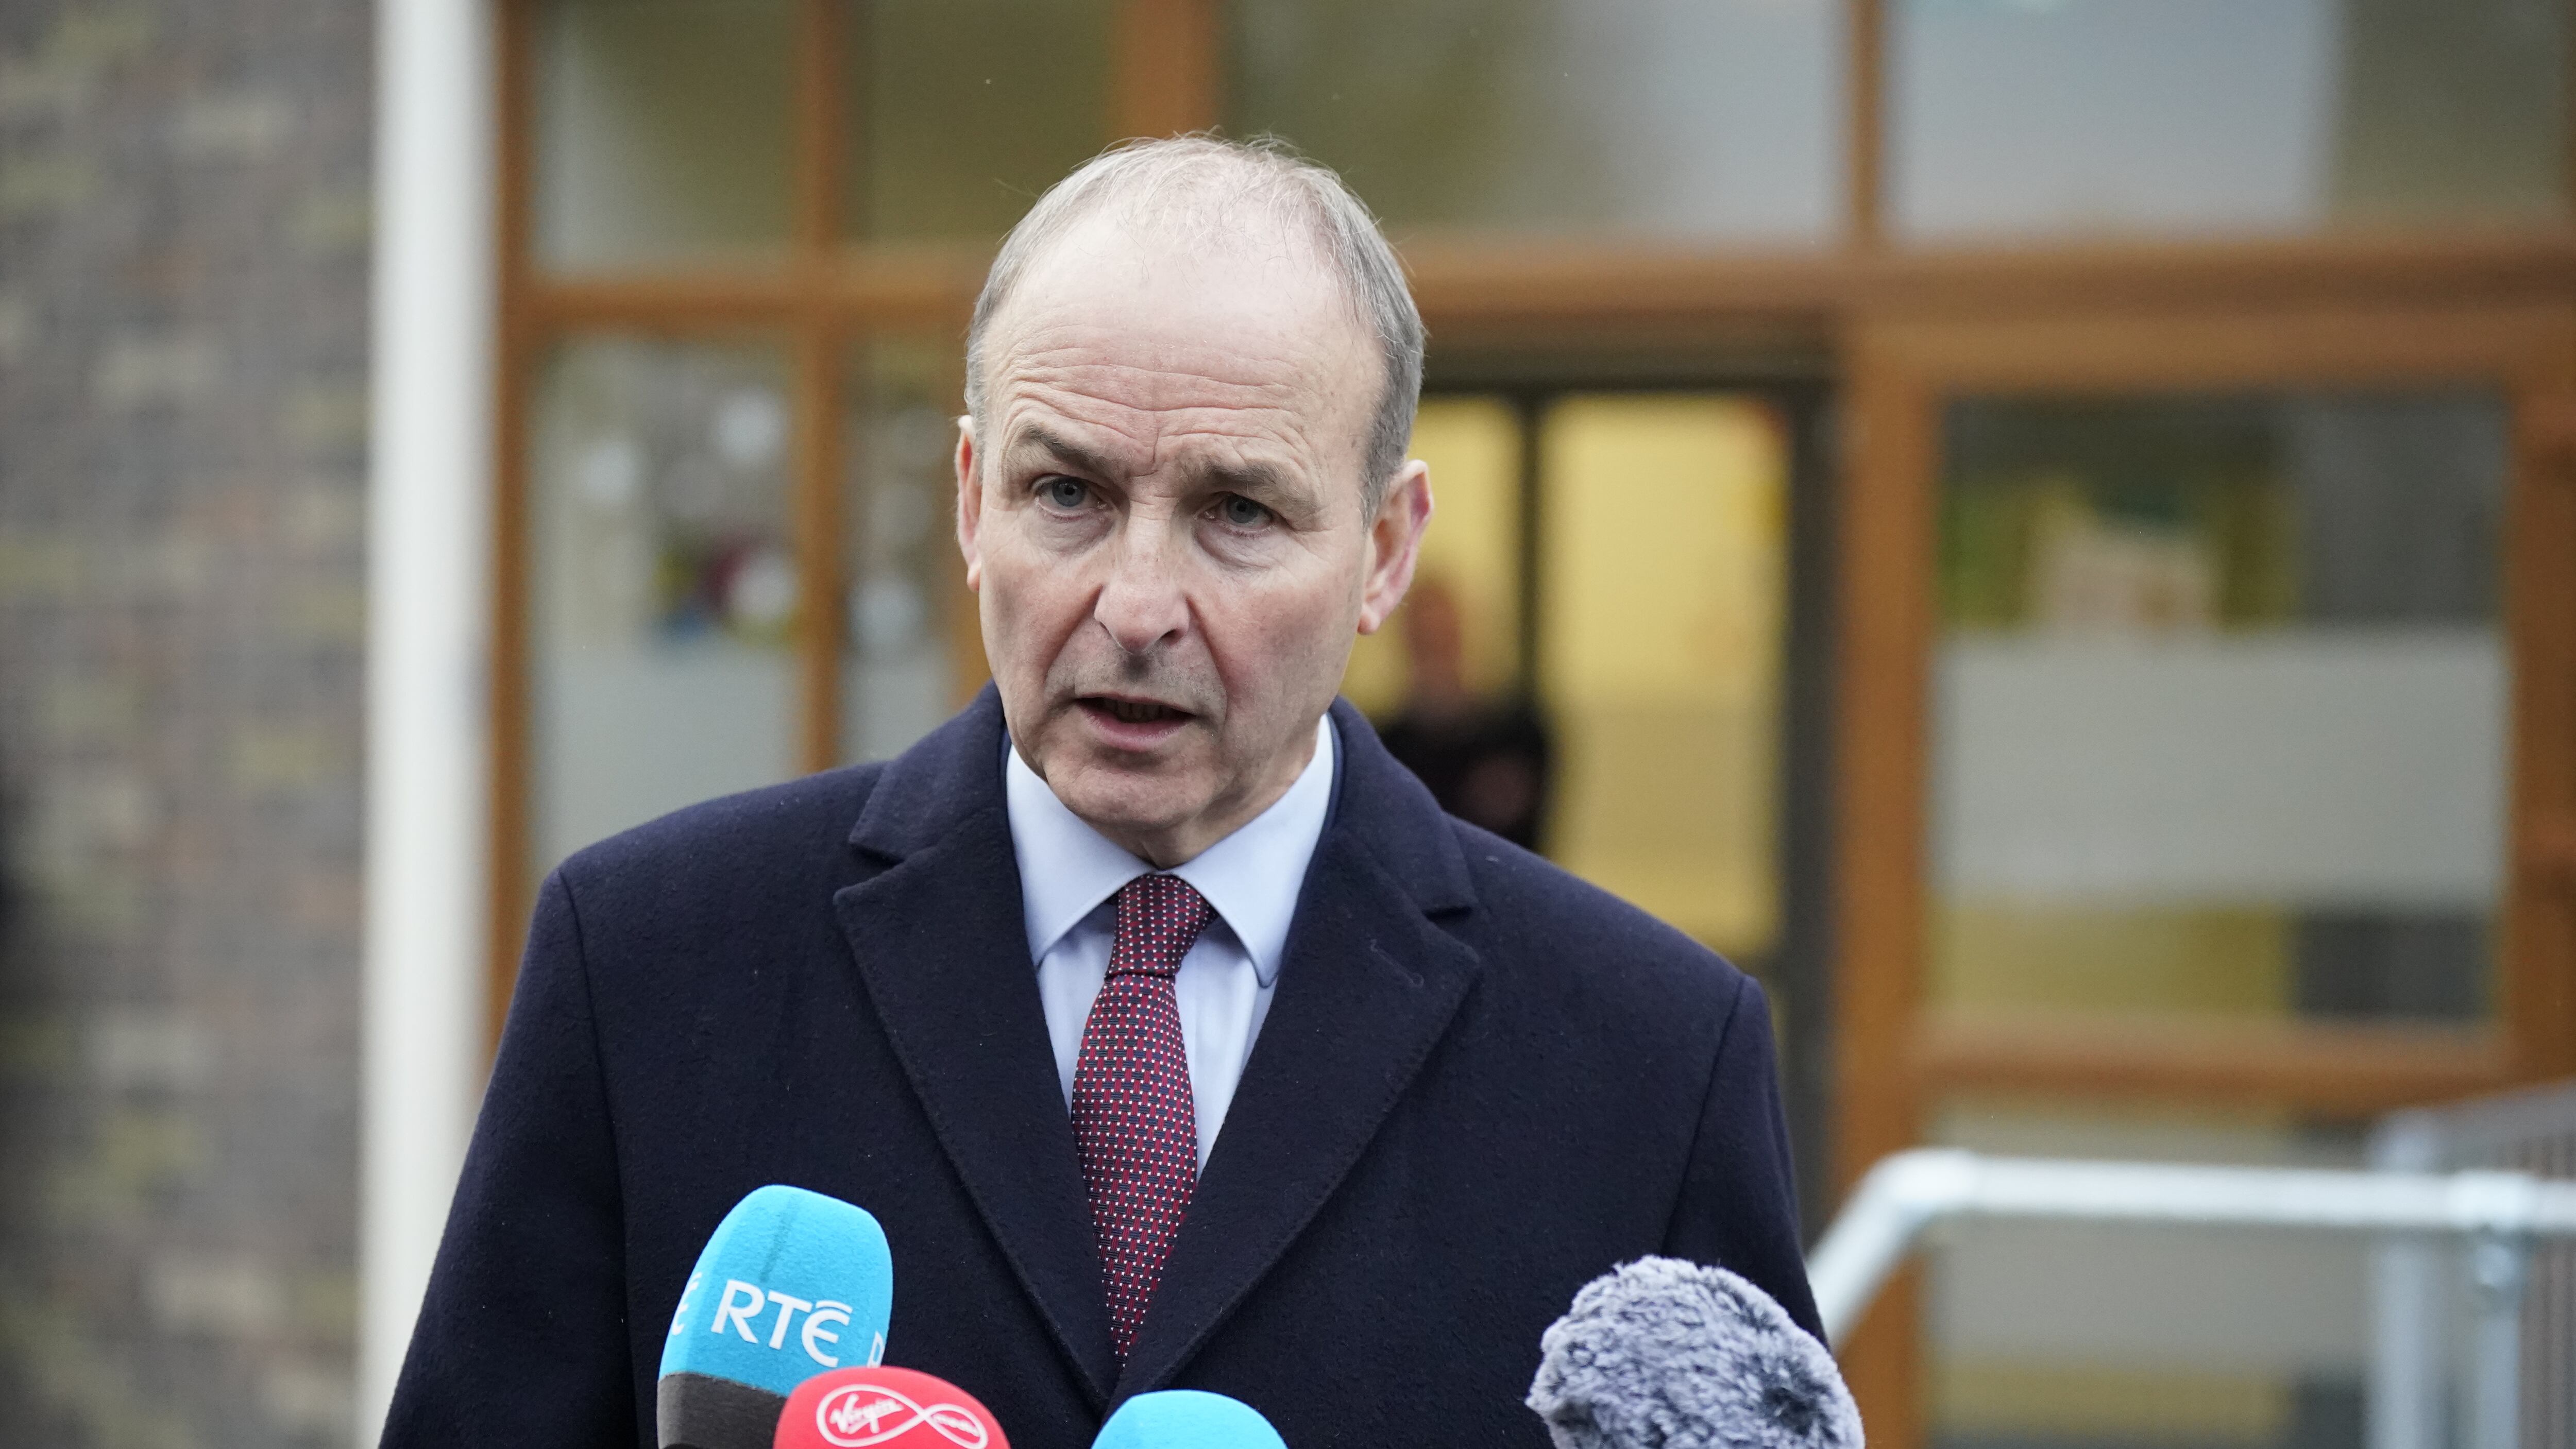 Tanaiste Micheal Martin has said Ireland will ‘strongly consider’ supporting the South African case